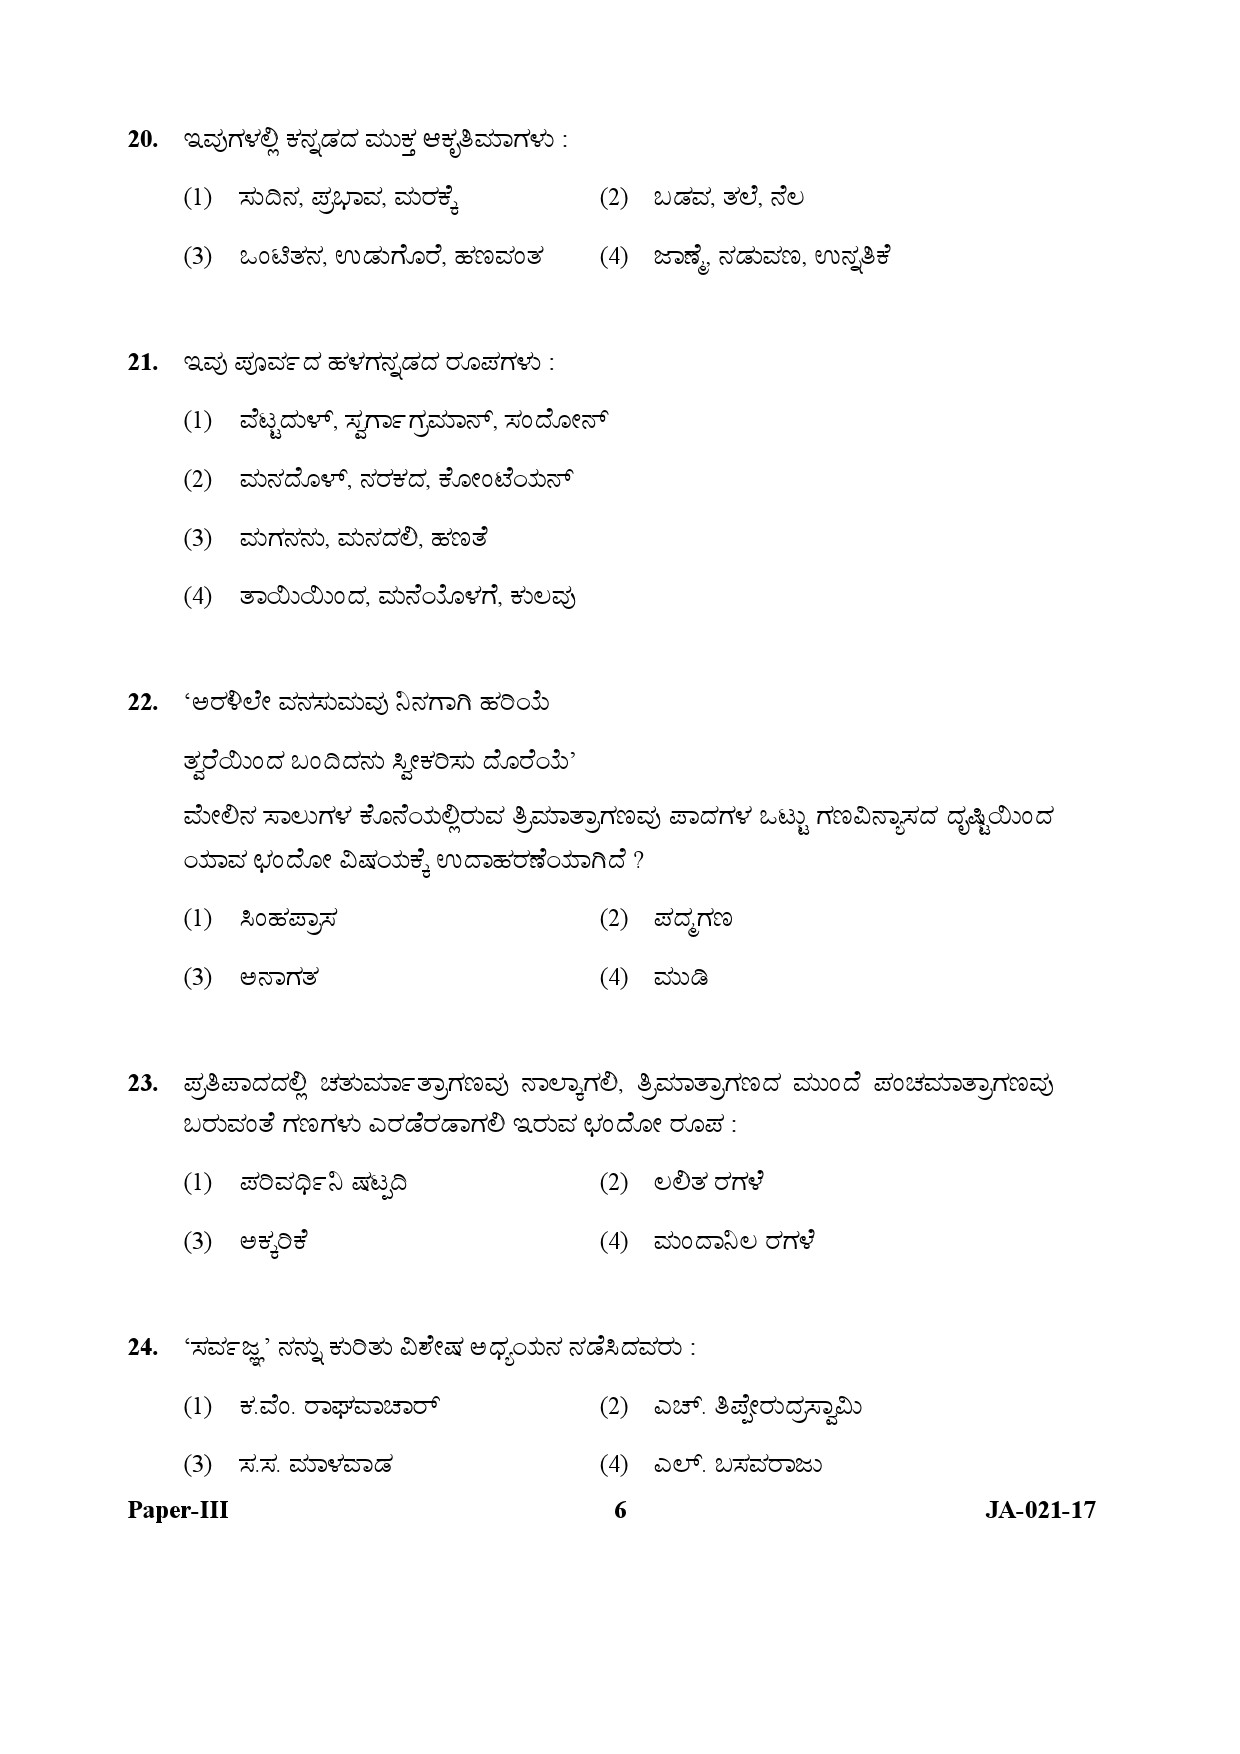 Kannada Question Paper III January 2017-UGC NET Previous Question Papers